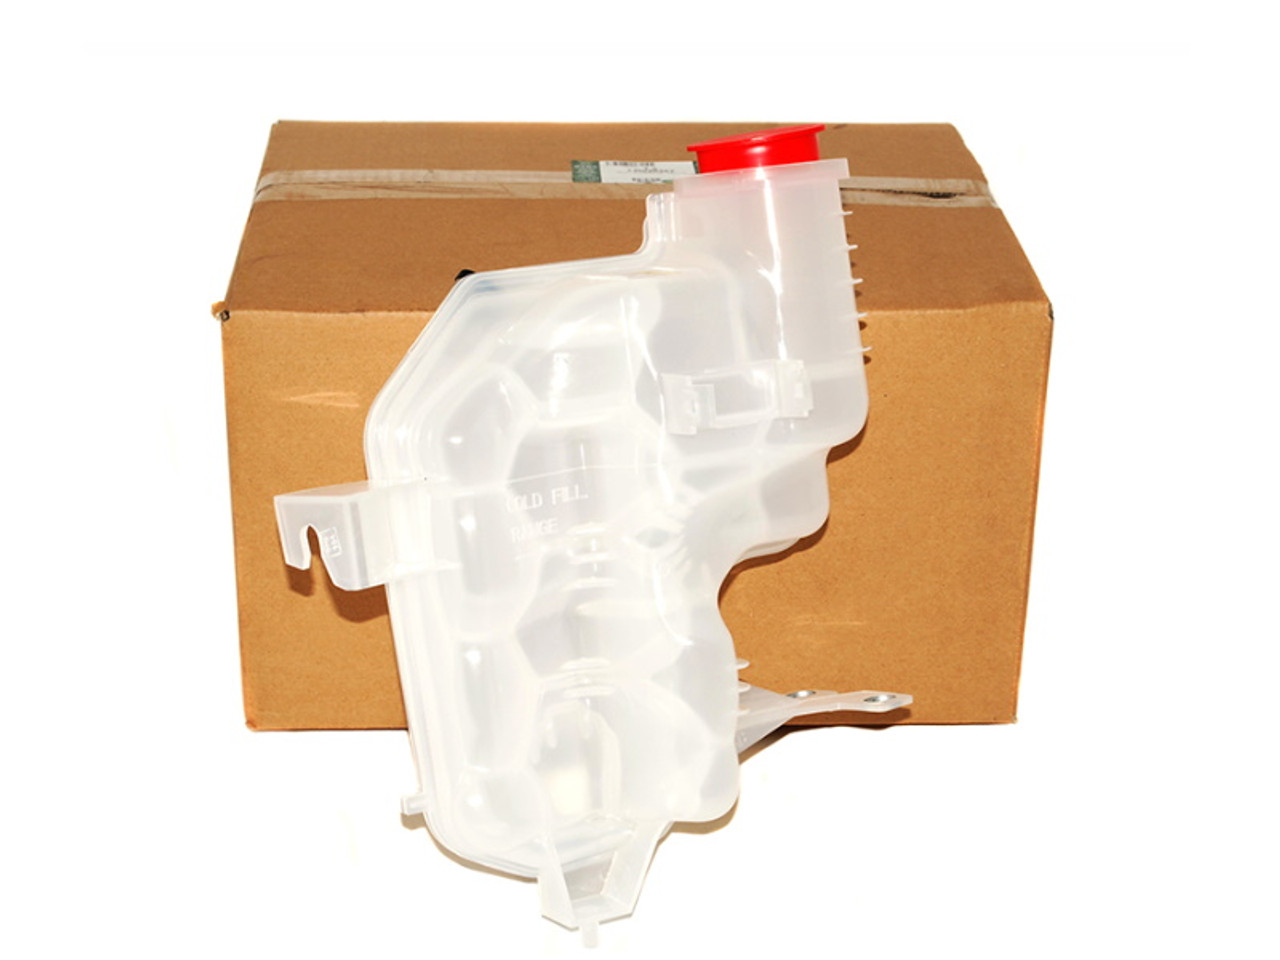 Genuine Discovery 3, 4 and Range Rover Sport Coolant Bottle or Reservoir - LR020367